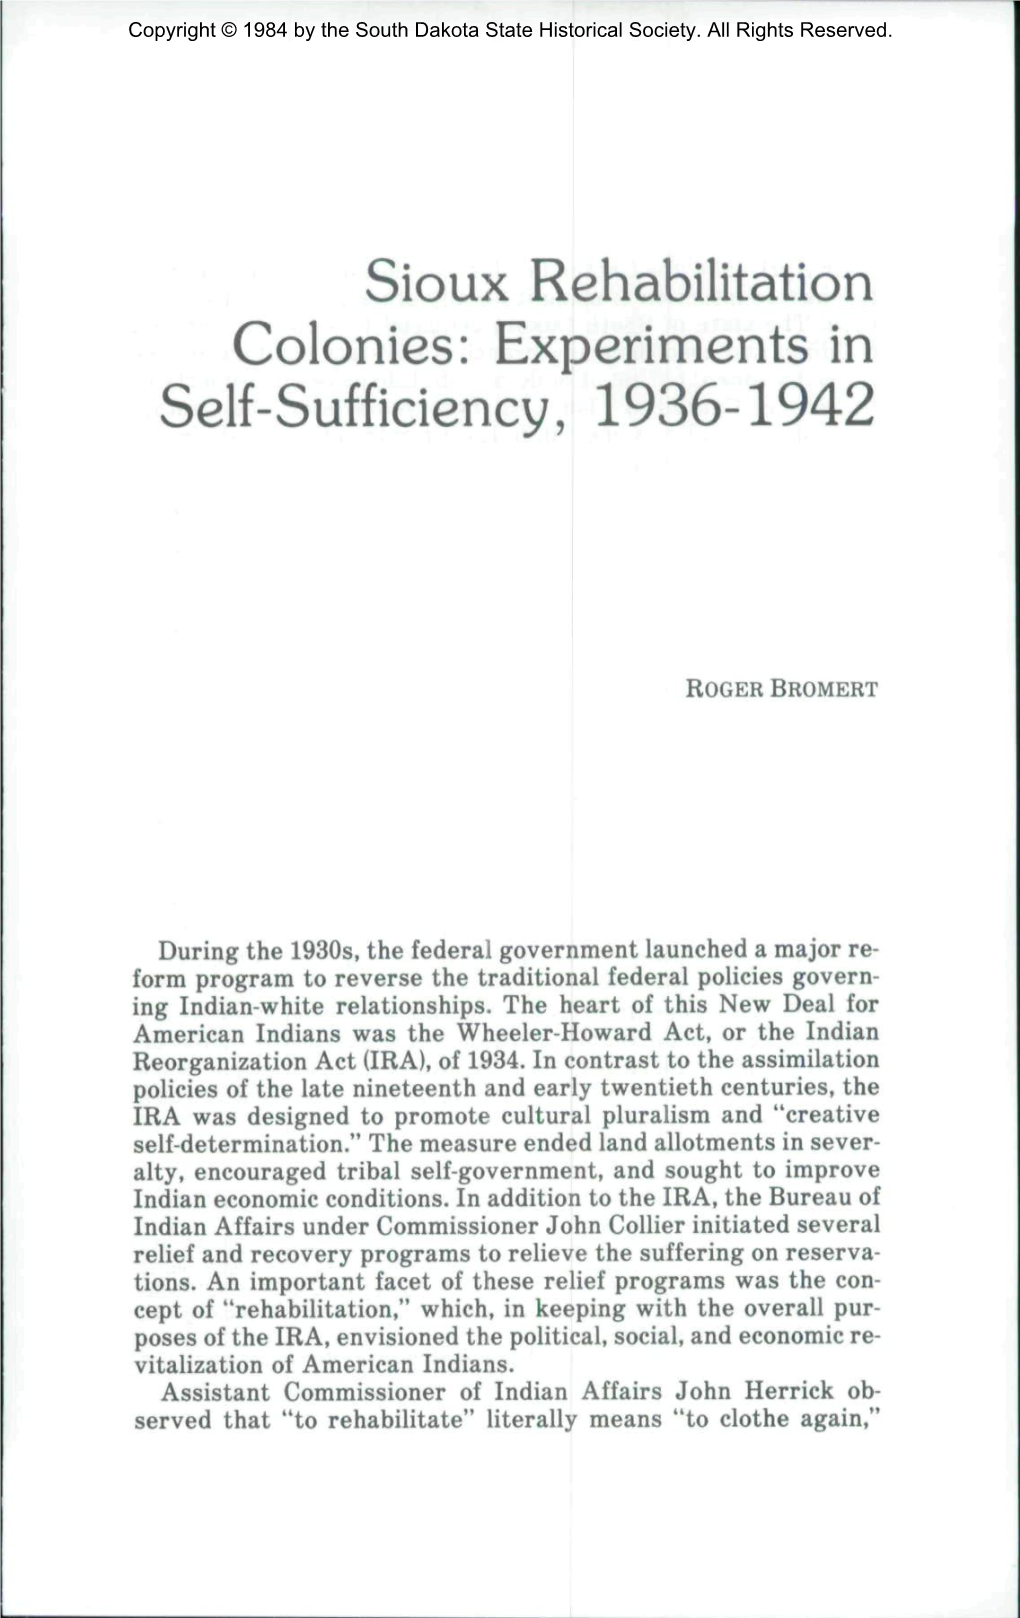 Sioux Rehabilitation Colonies: Experiments in Self-Sufficiency, 1936-1942